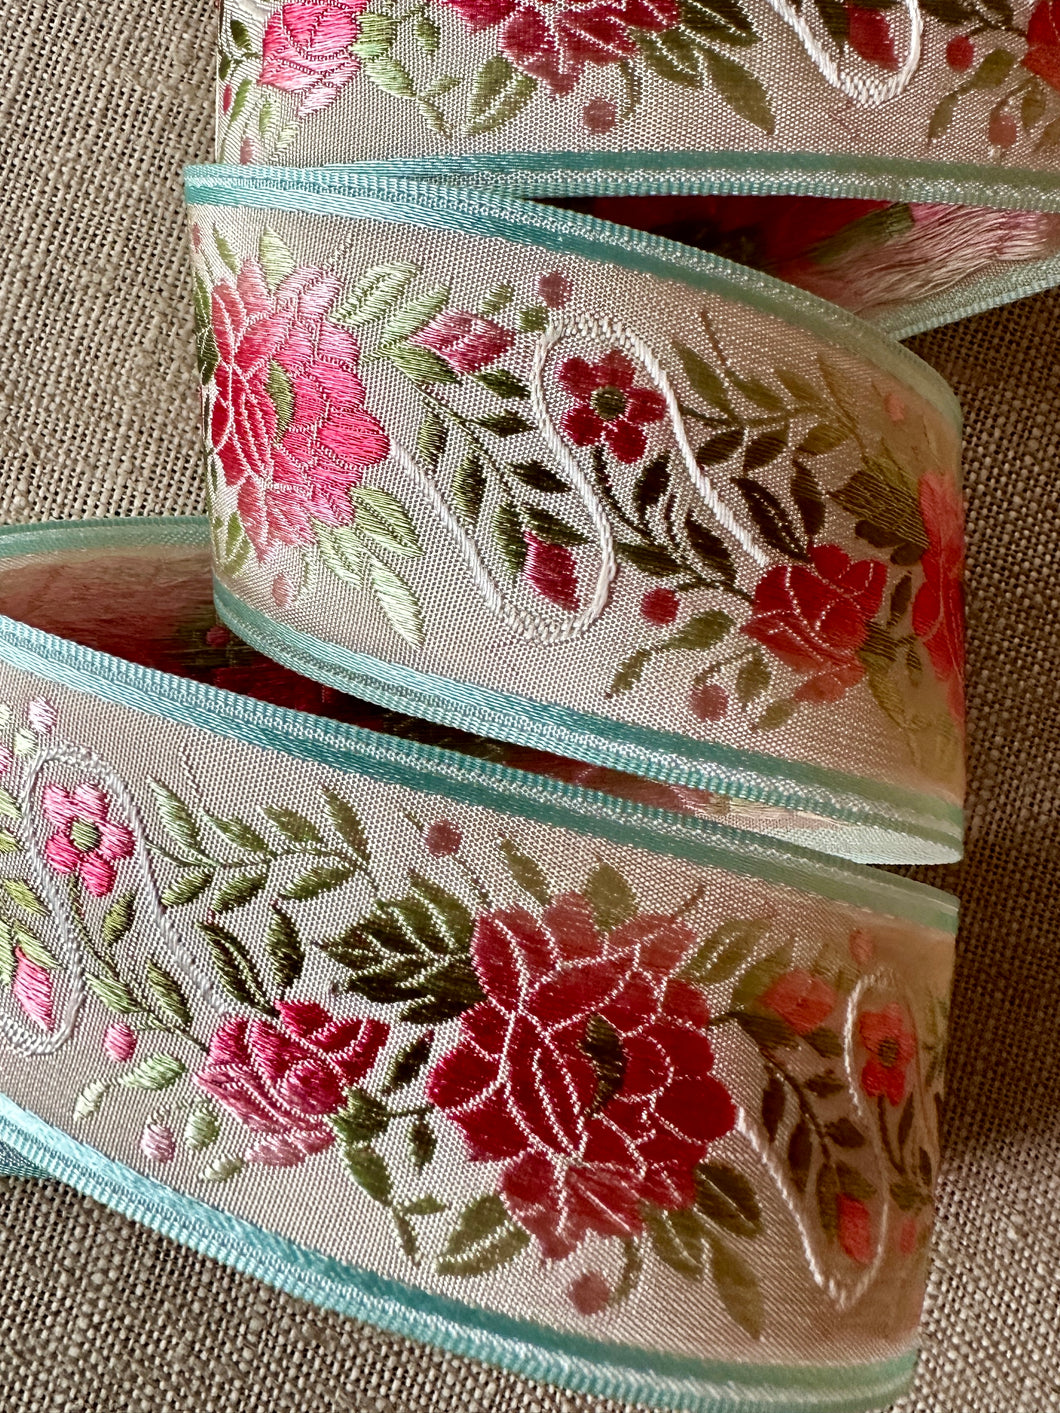 Vintage Pink Ombre Roses and Buds Ribbon Three Different